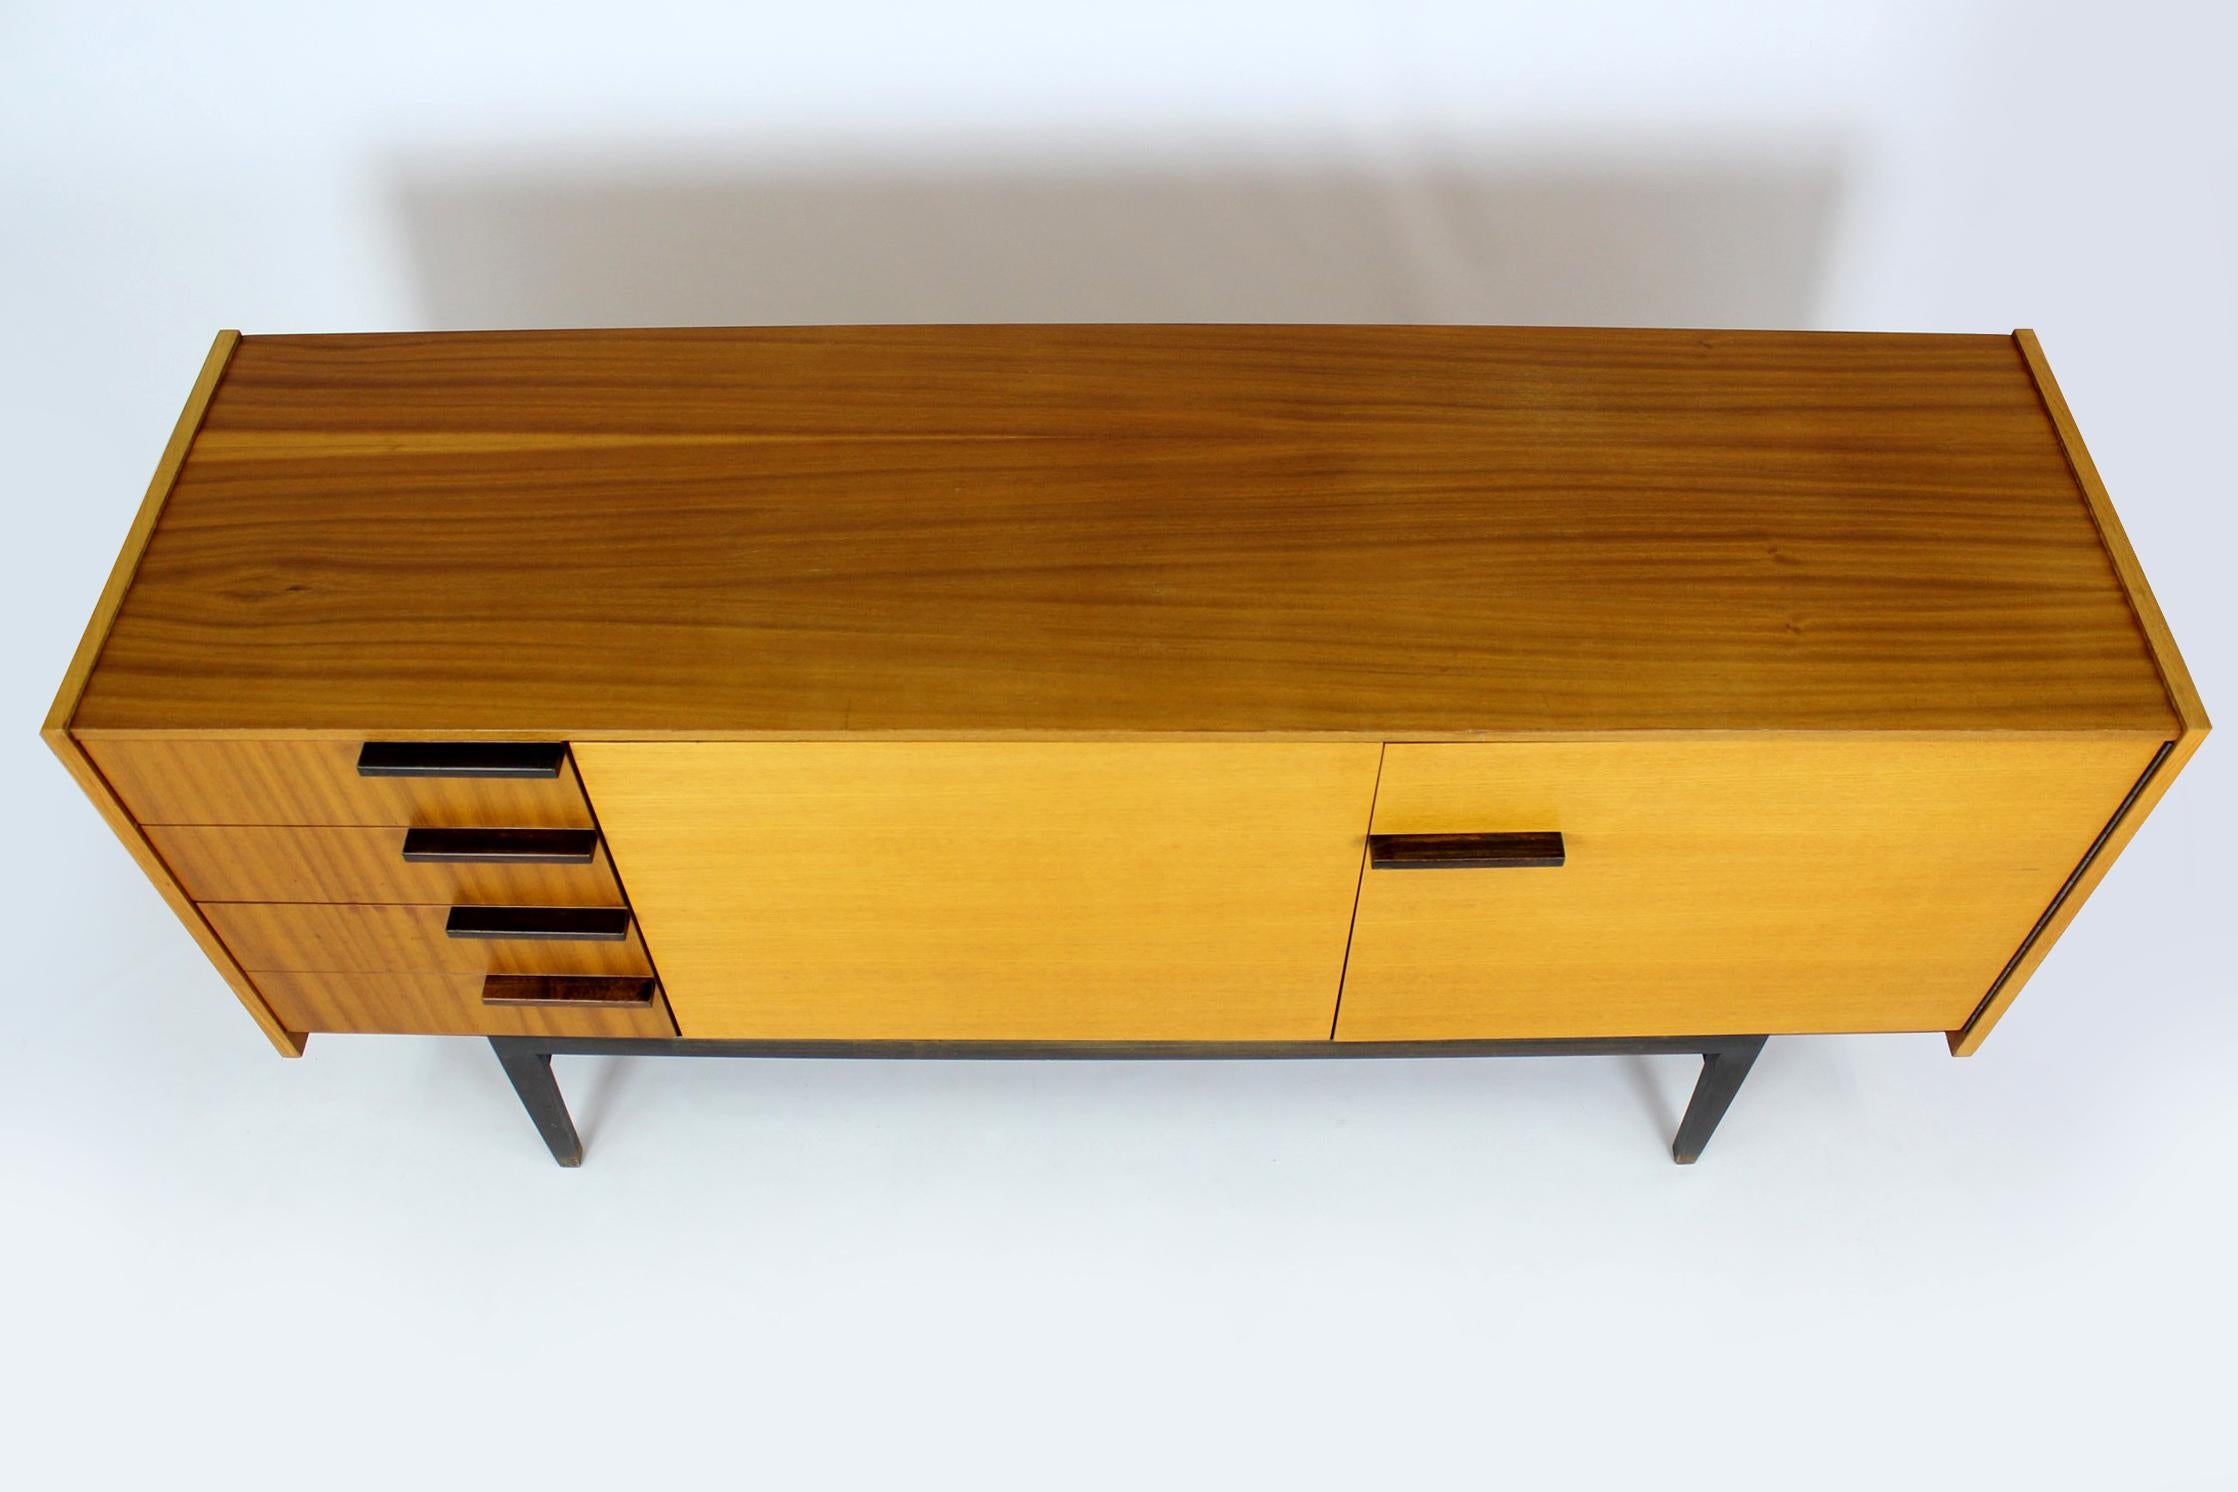 
This  ash & mahogany sideboard was manufactured in 1970 by UP Zavody in Czechoslovakia. It has 4 drawers and 3 shelves inside. The sideboard is preserved in its original, very good condition.
We have more furniture from this set (wardrobe,